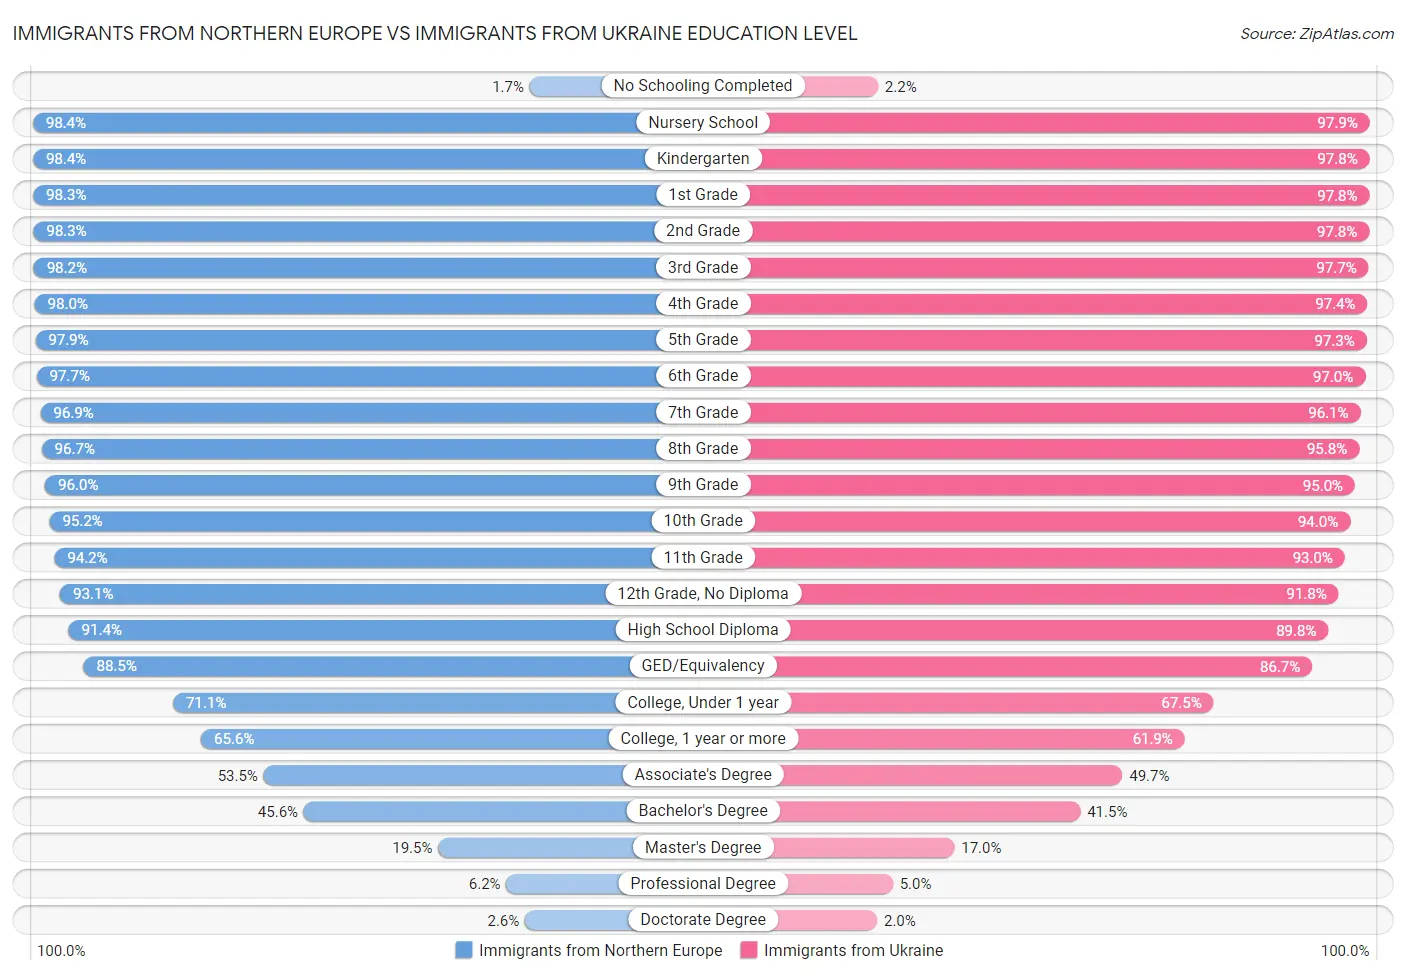 Immigrants from Northern Europe vs Immigrants from Ukraine Education Level